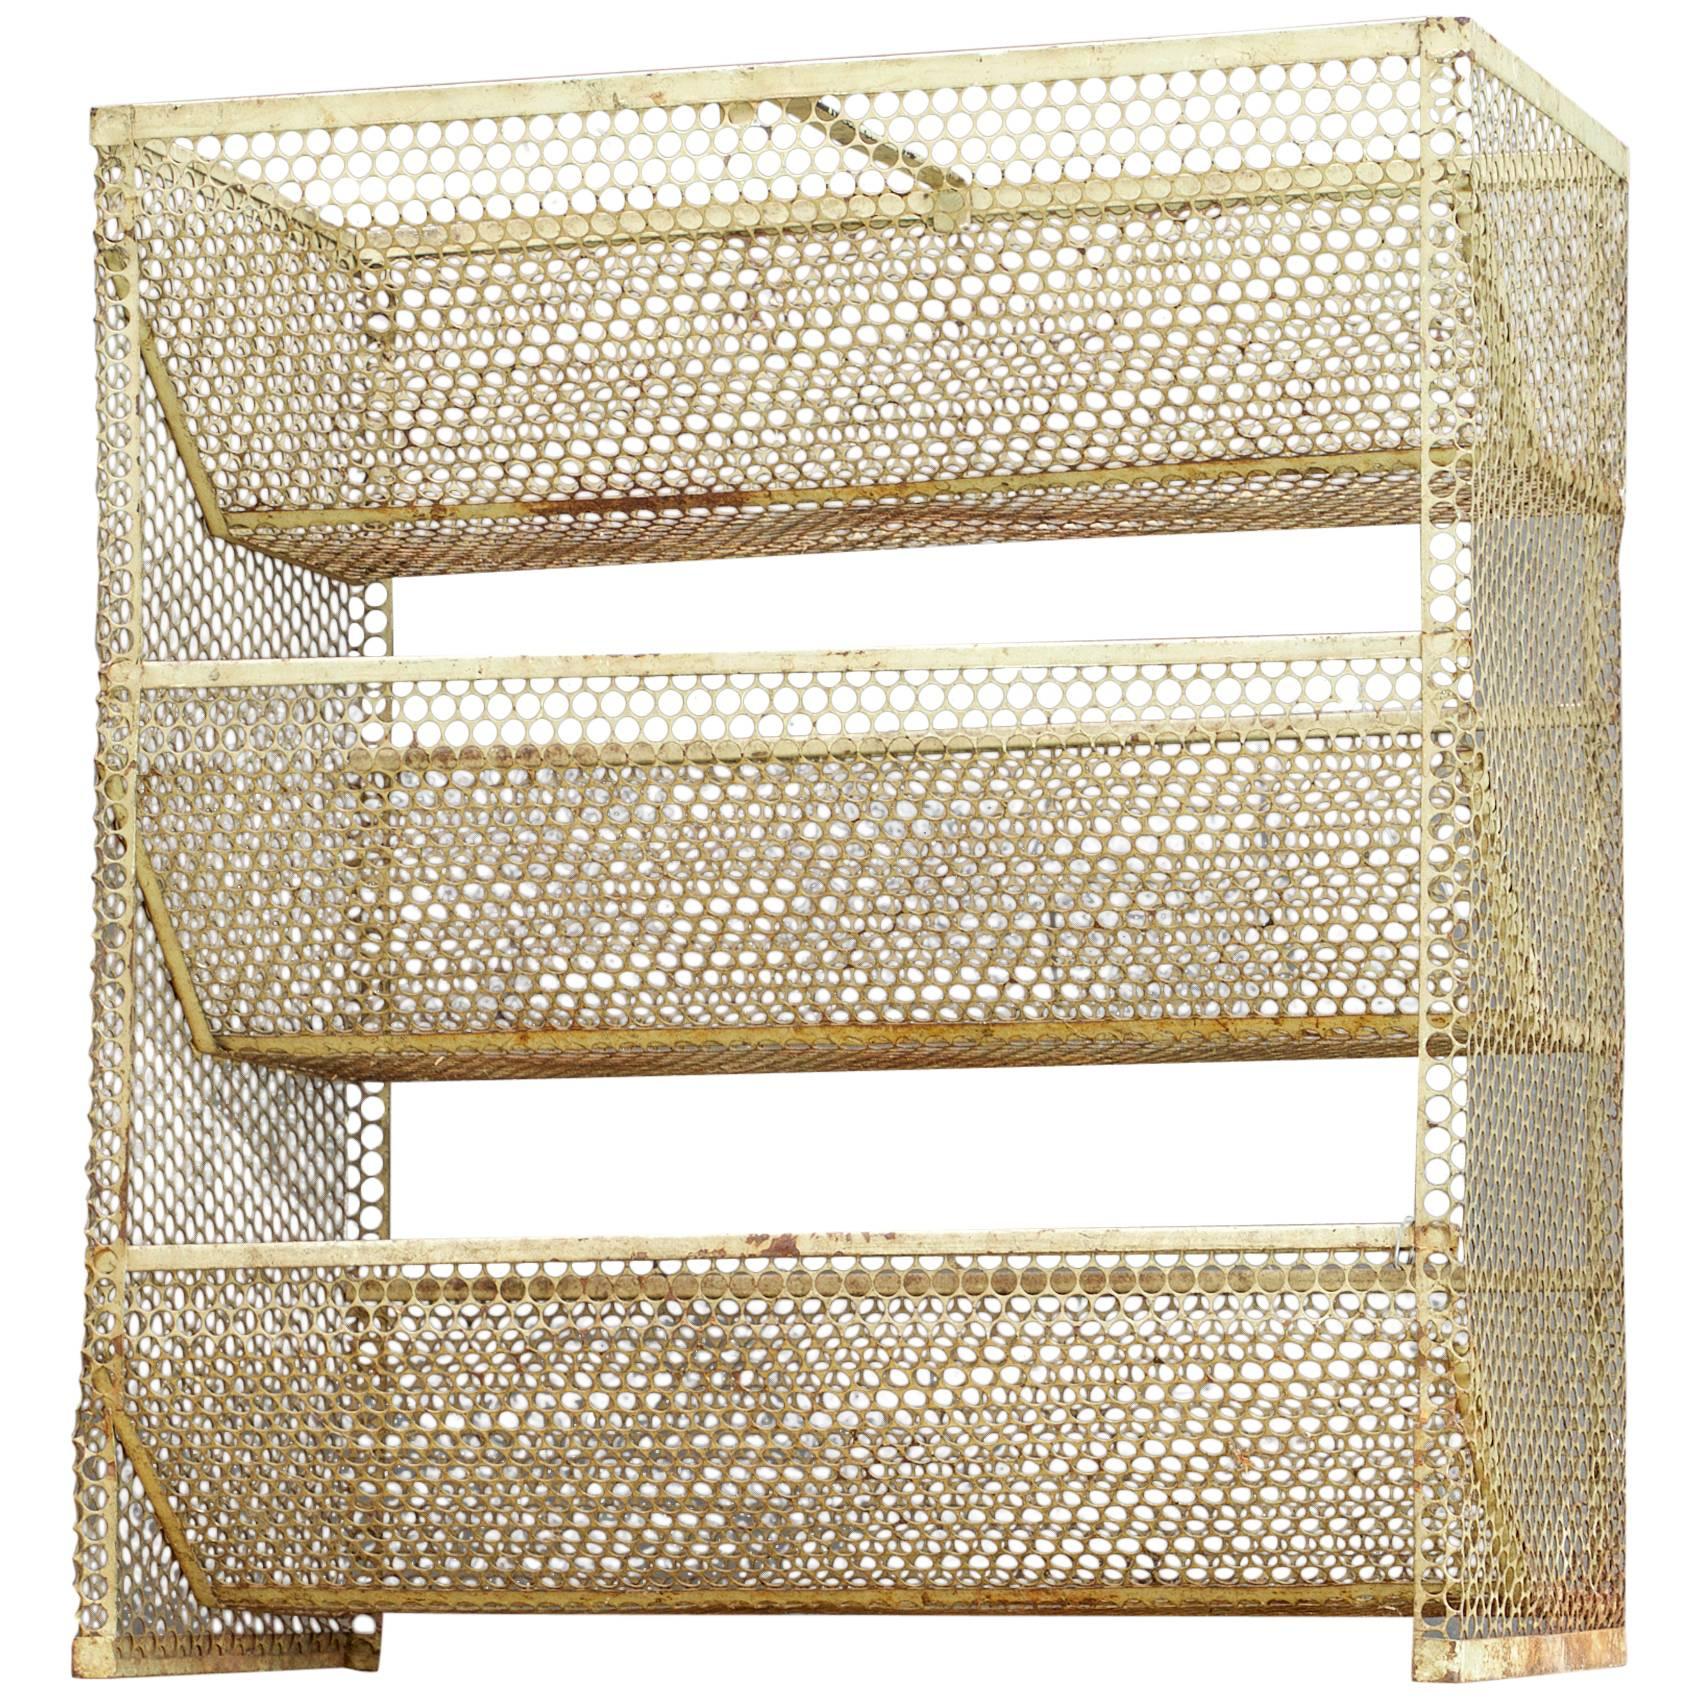 Prouve style Industrial Perforated Metal Display Shelf